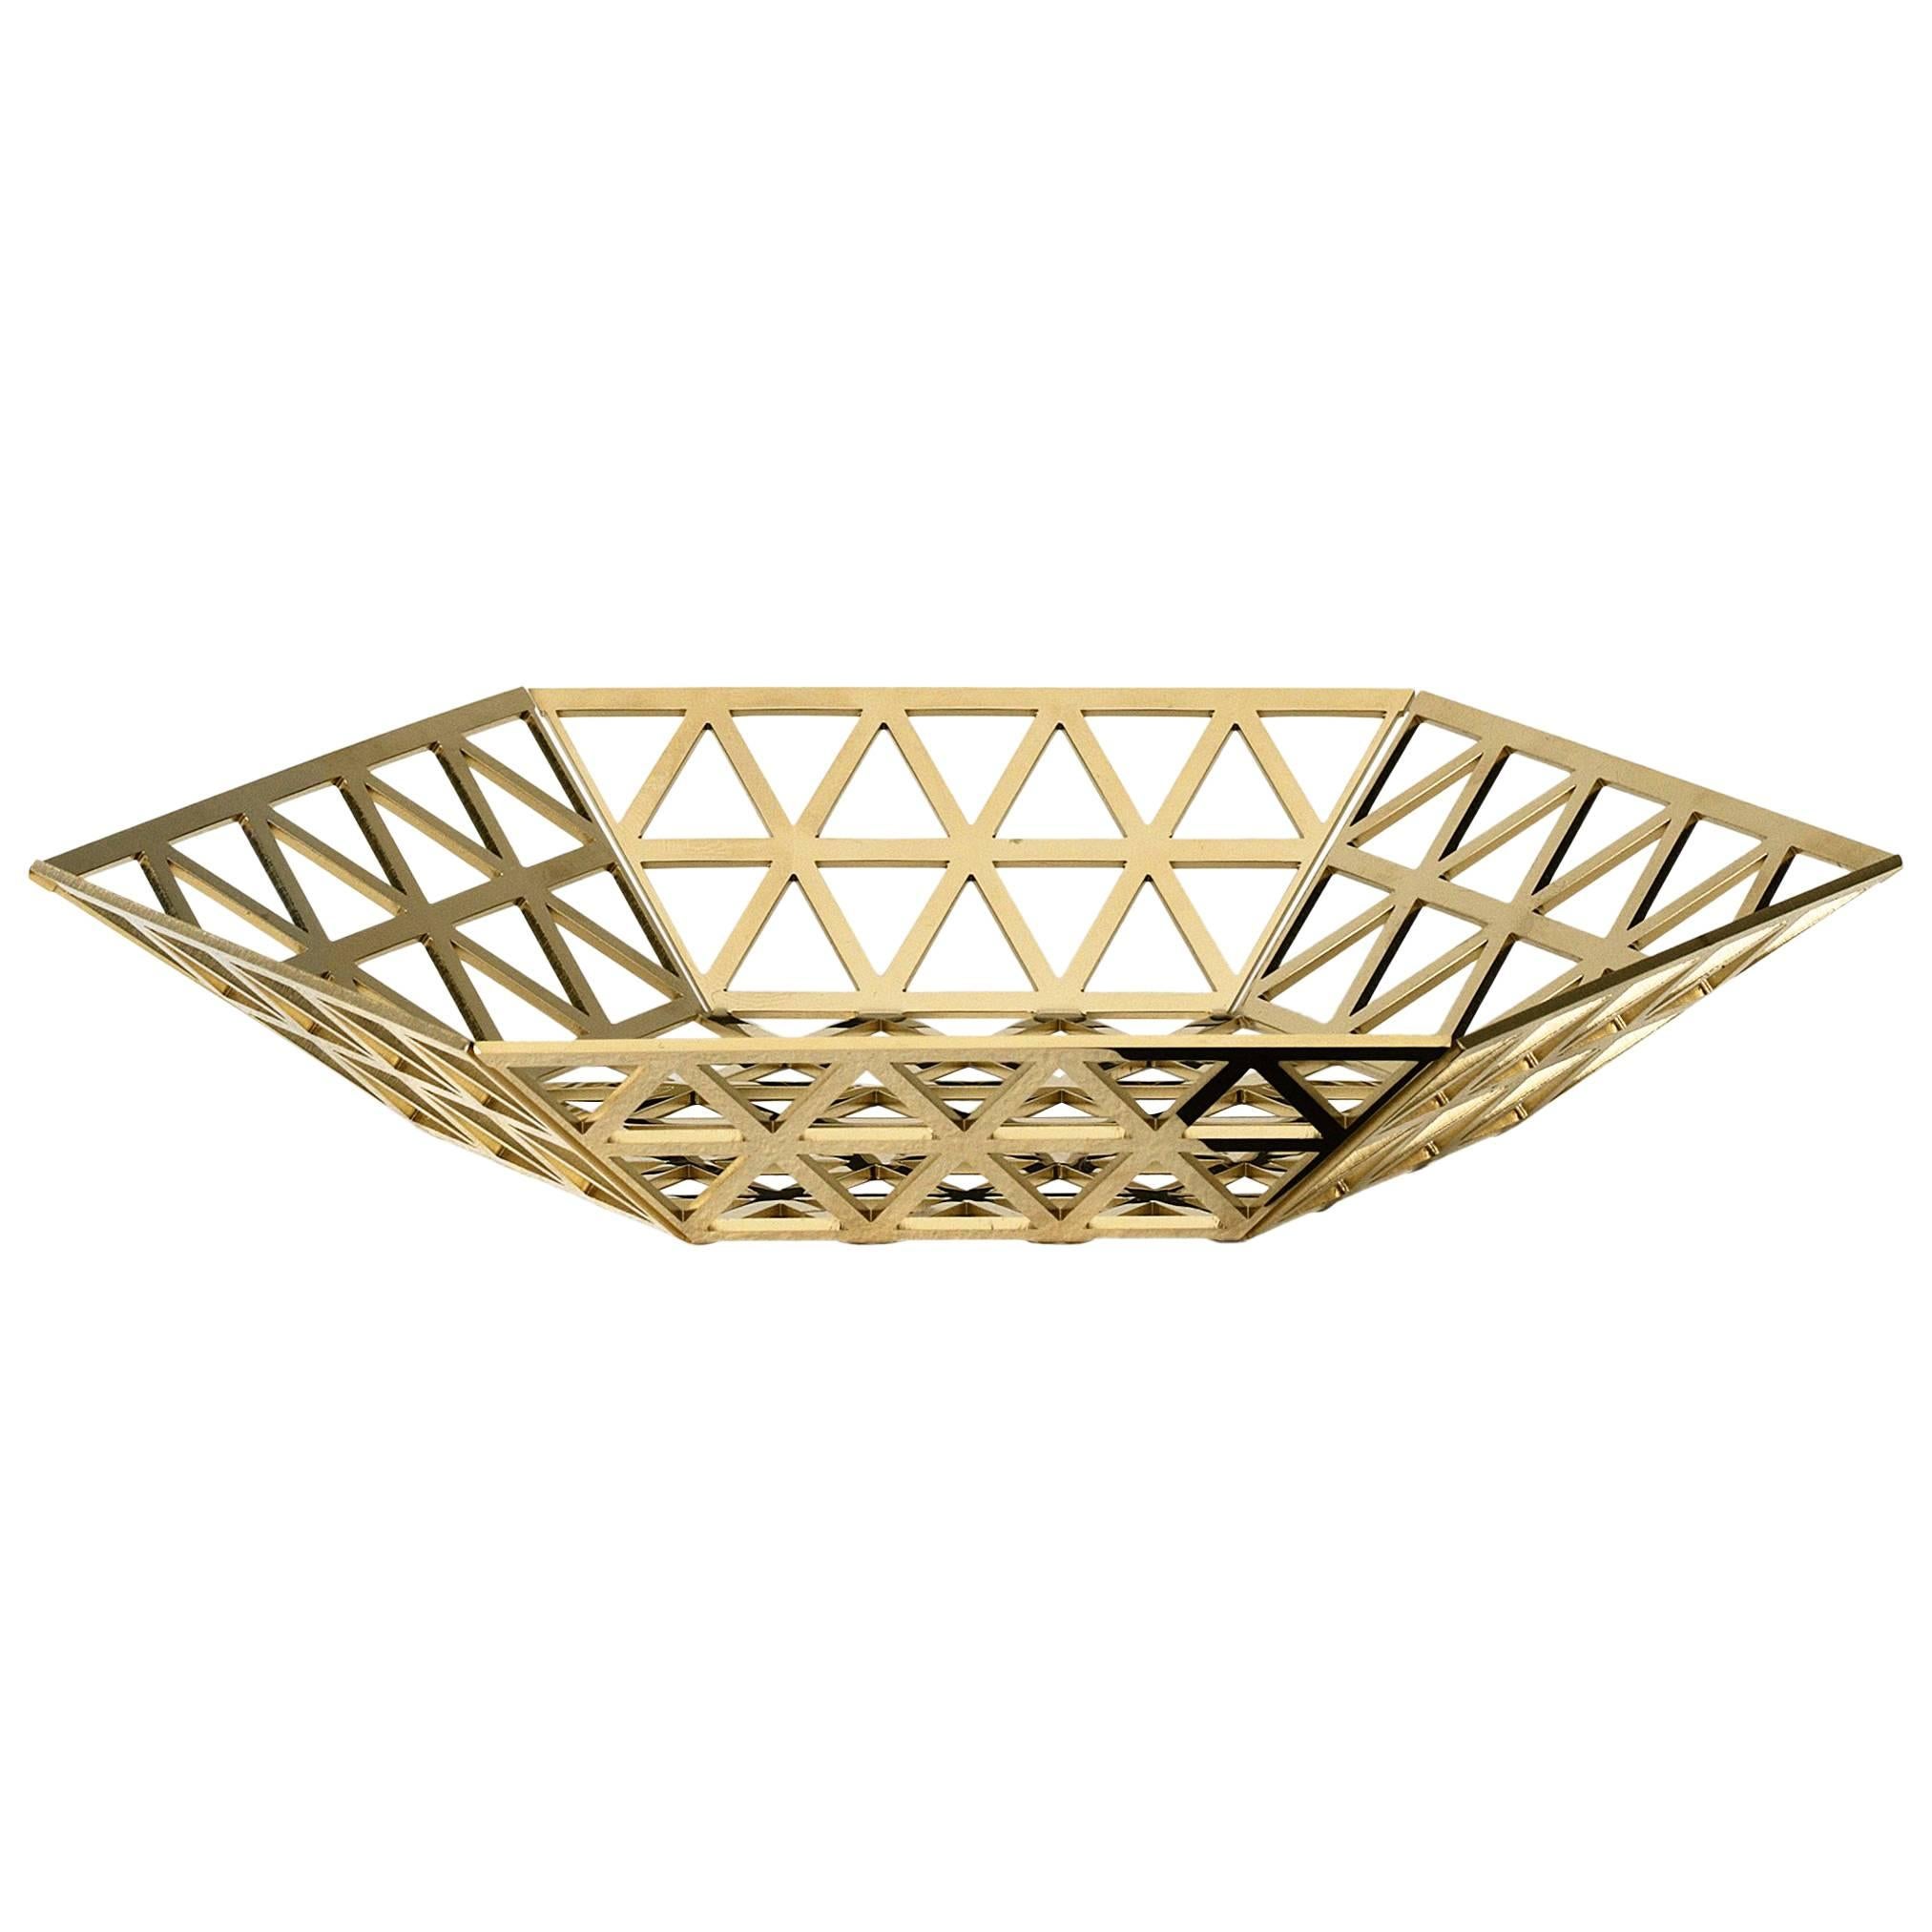 Ghidini 1961 Tip Top Flat Tray in Polished Gold Finish For Sale